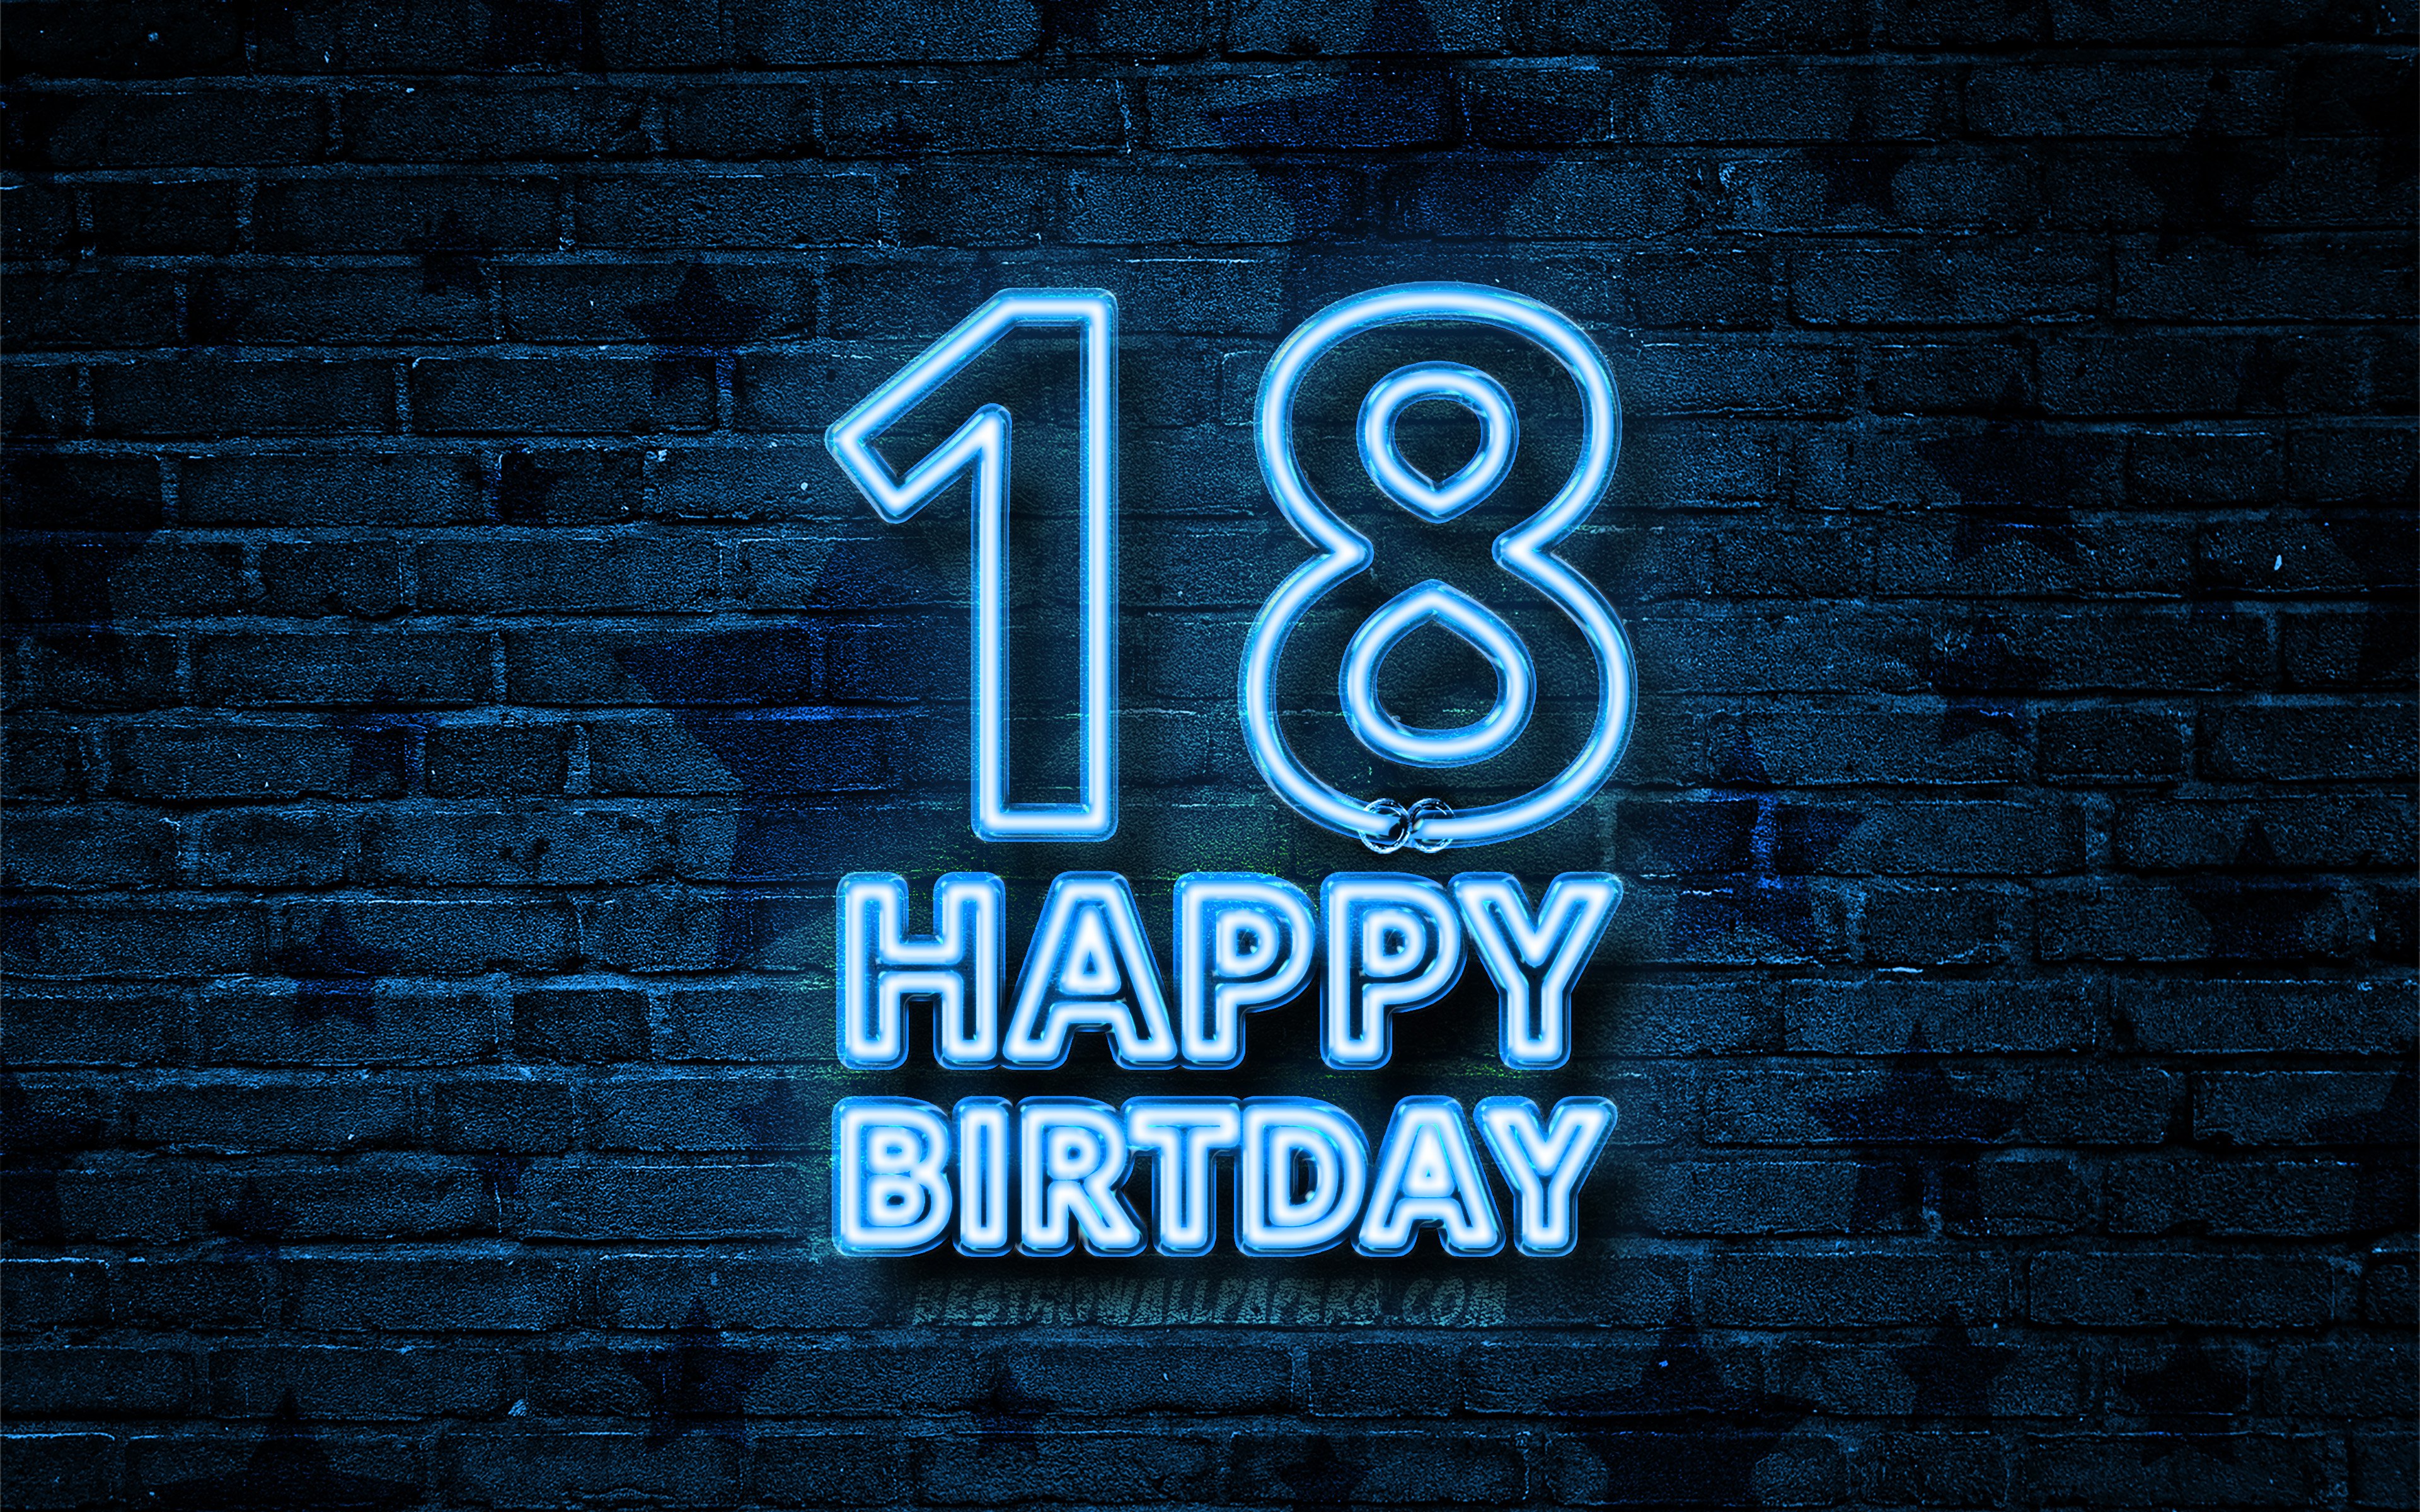 Download wallpaper Happy 18 Years Birthday, 4k, blue neon text, 18th Birthday Party, blue brickwall, Happy 18th birthday, Birthday concept, Birthday Party, 18th Birthday for desktop with resolution 3840x2400. High Quality HD